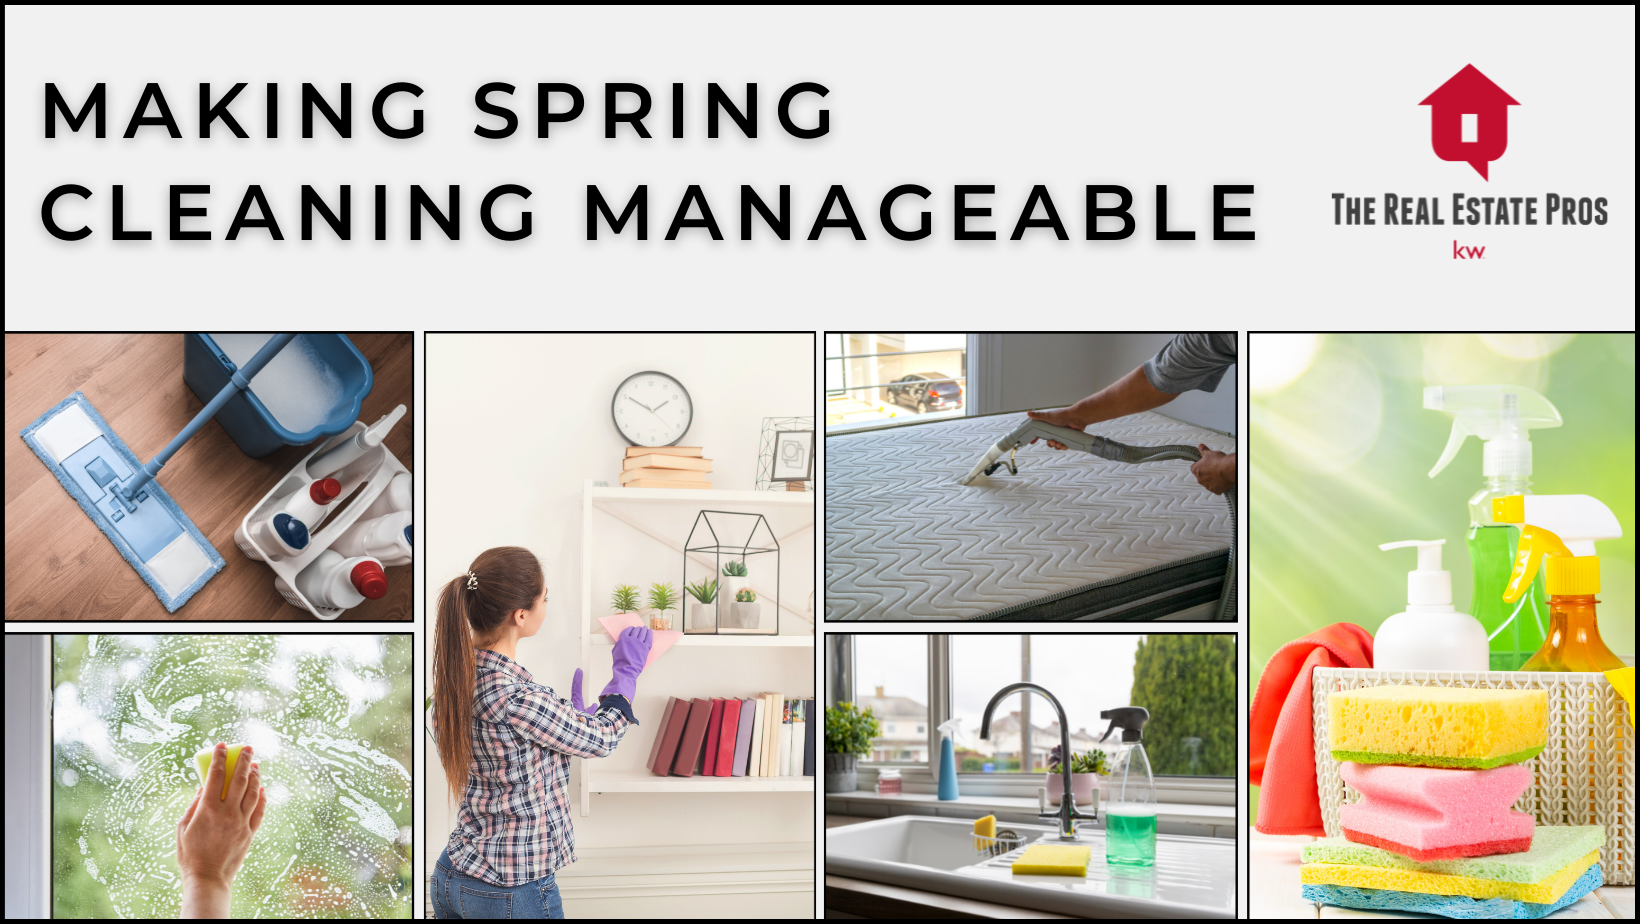 Spring Cleaning Doesn’t Have to Be Scary